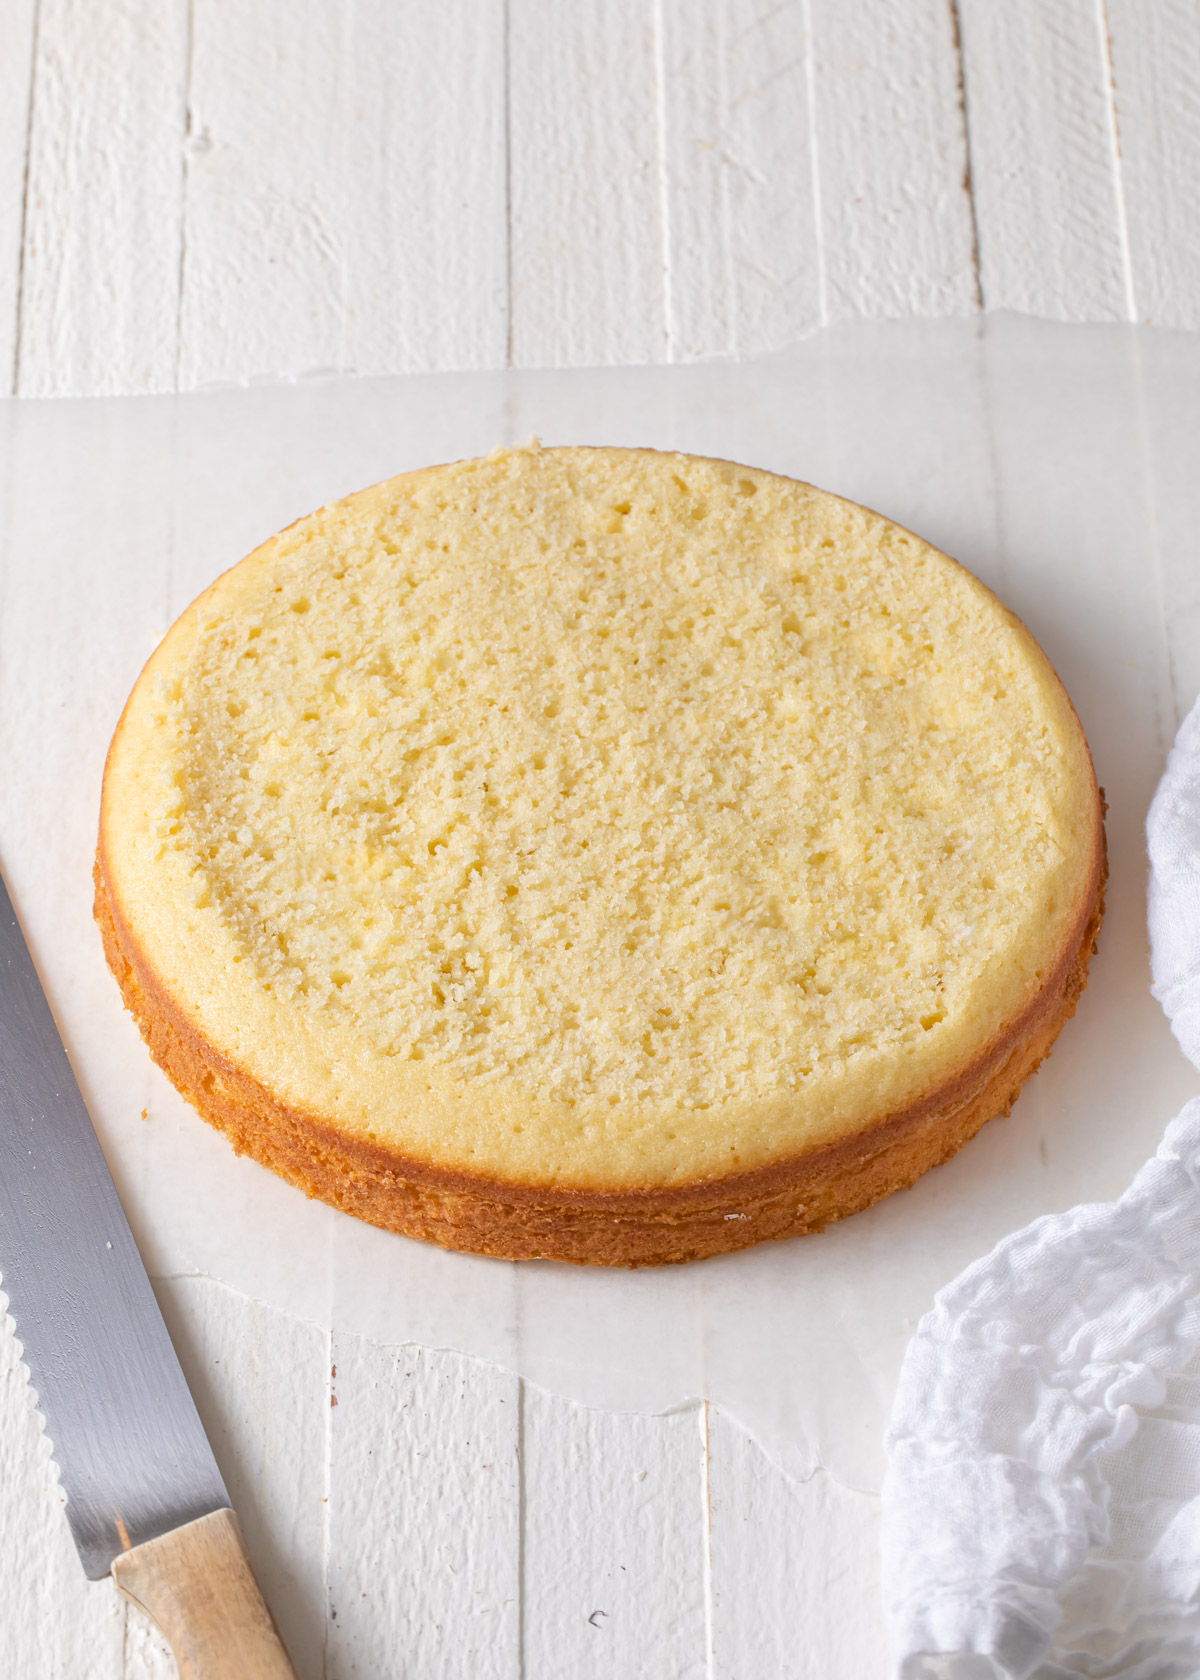 A plain yellow cake layer that has been trimmed flat